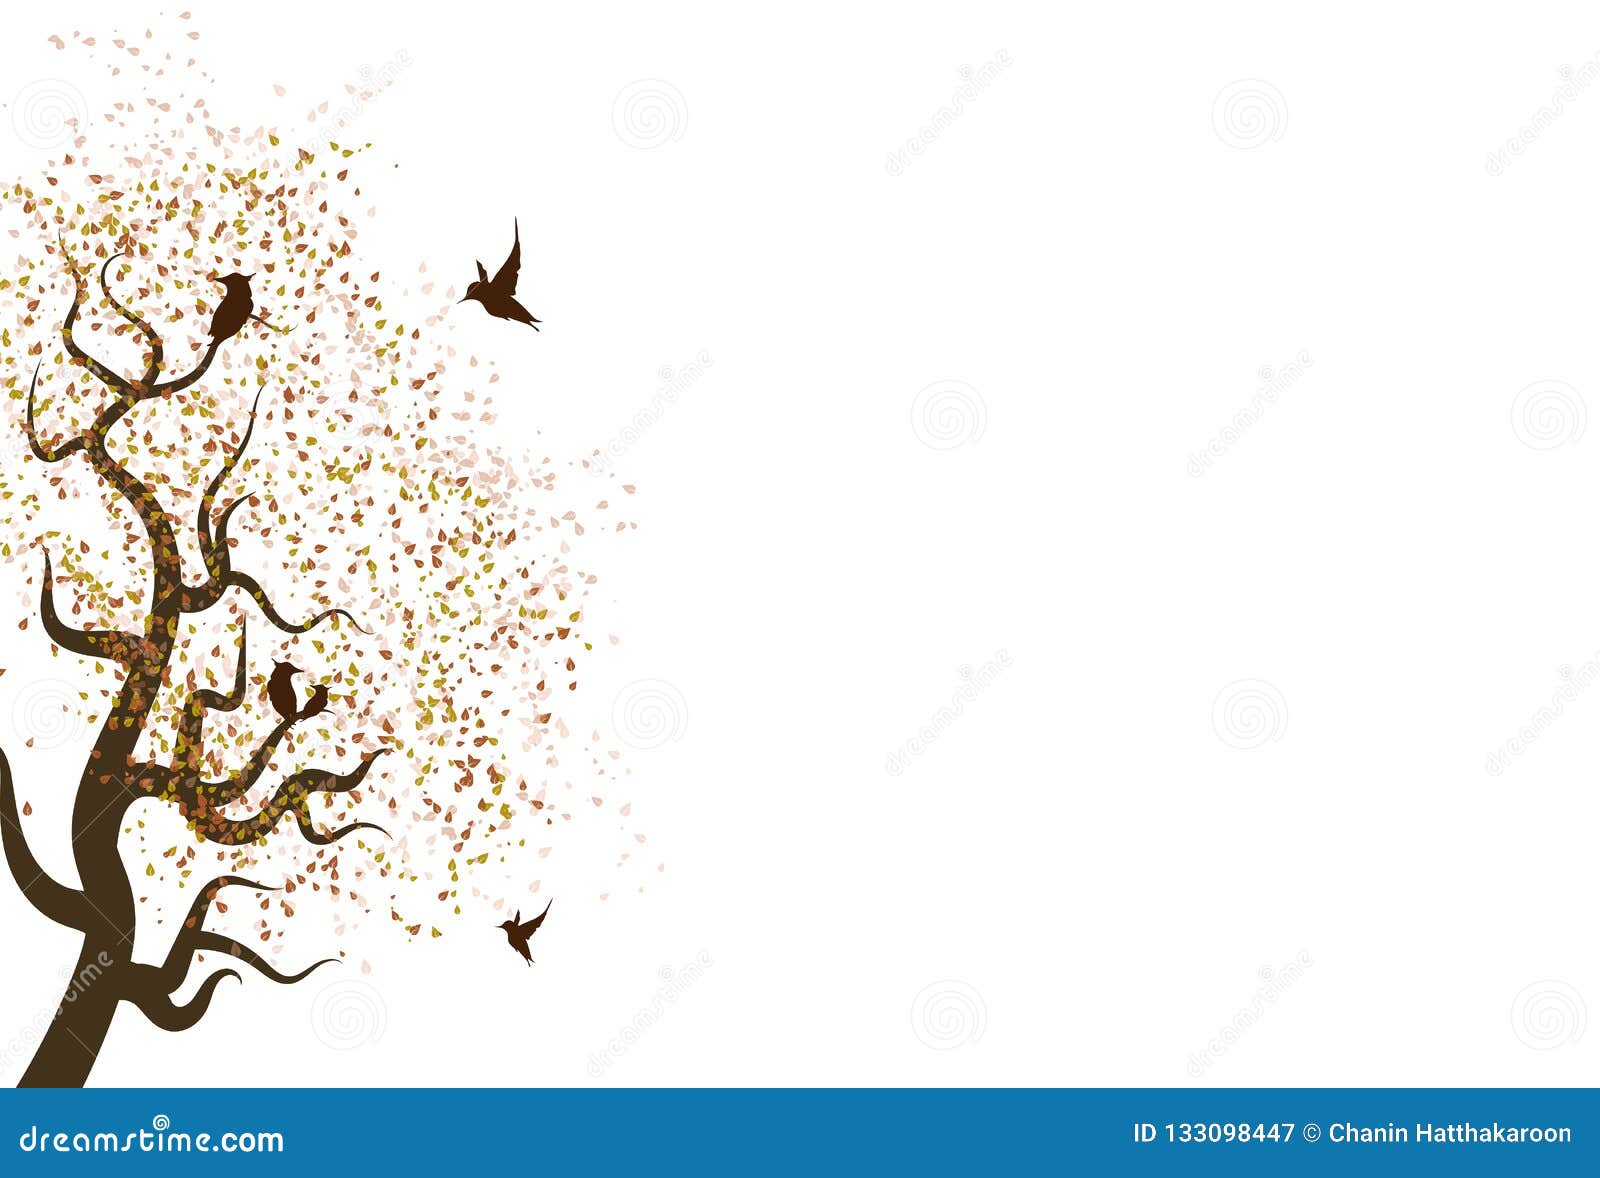 Autumn Leaves Scatter Fall in Nature with Animal Wildlife Concept on White Abstract Background Textured Stock Illustration cover, blowing: 133098447